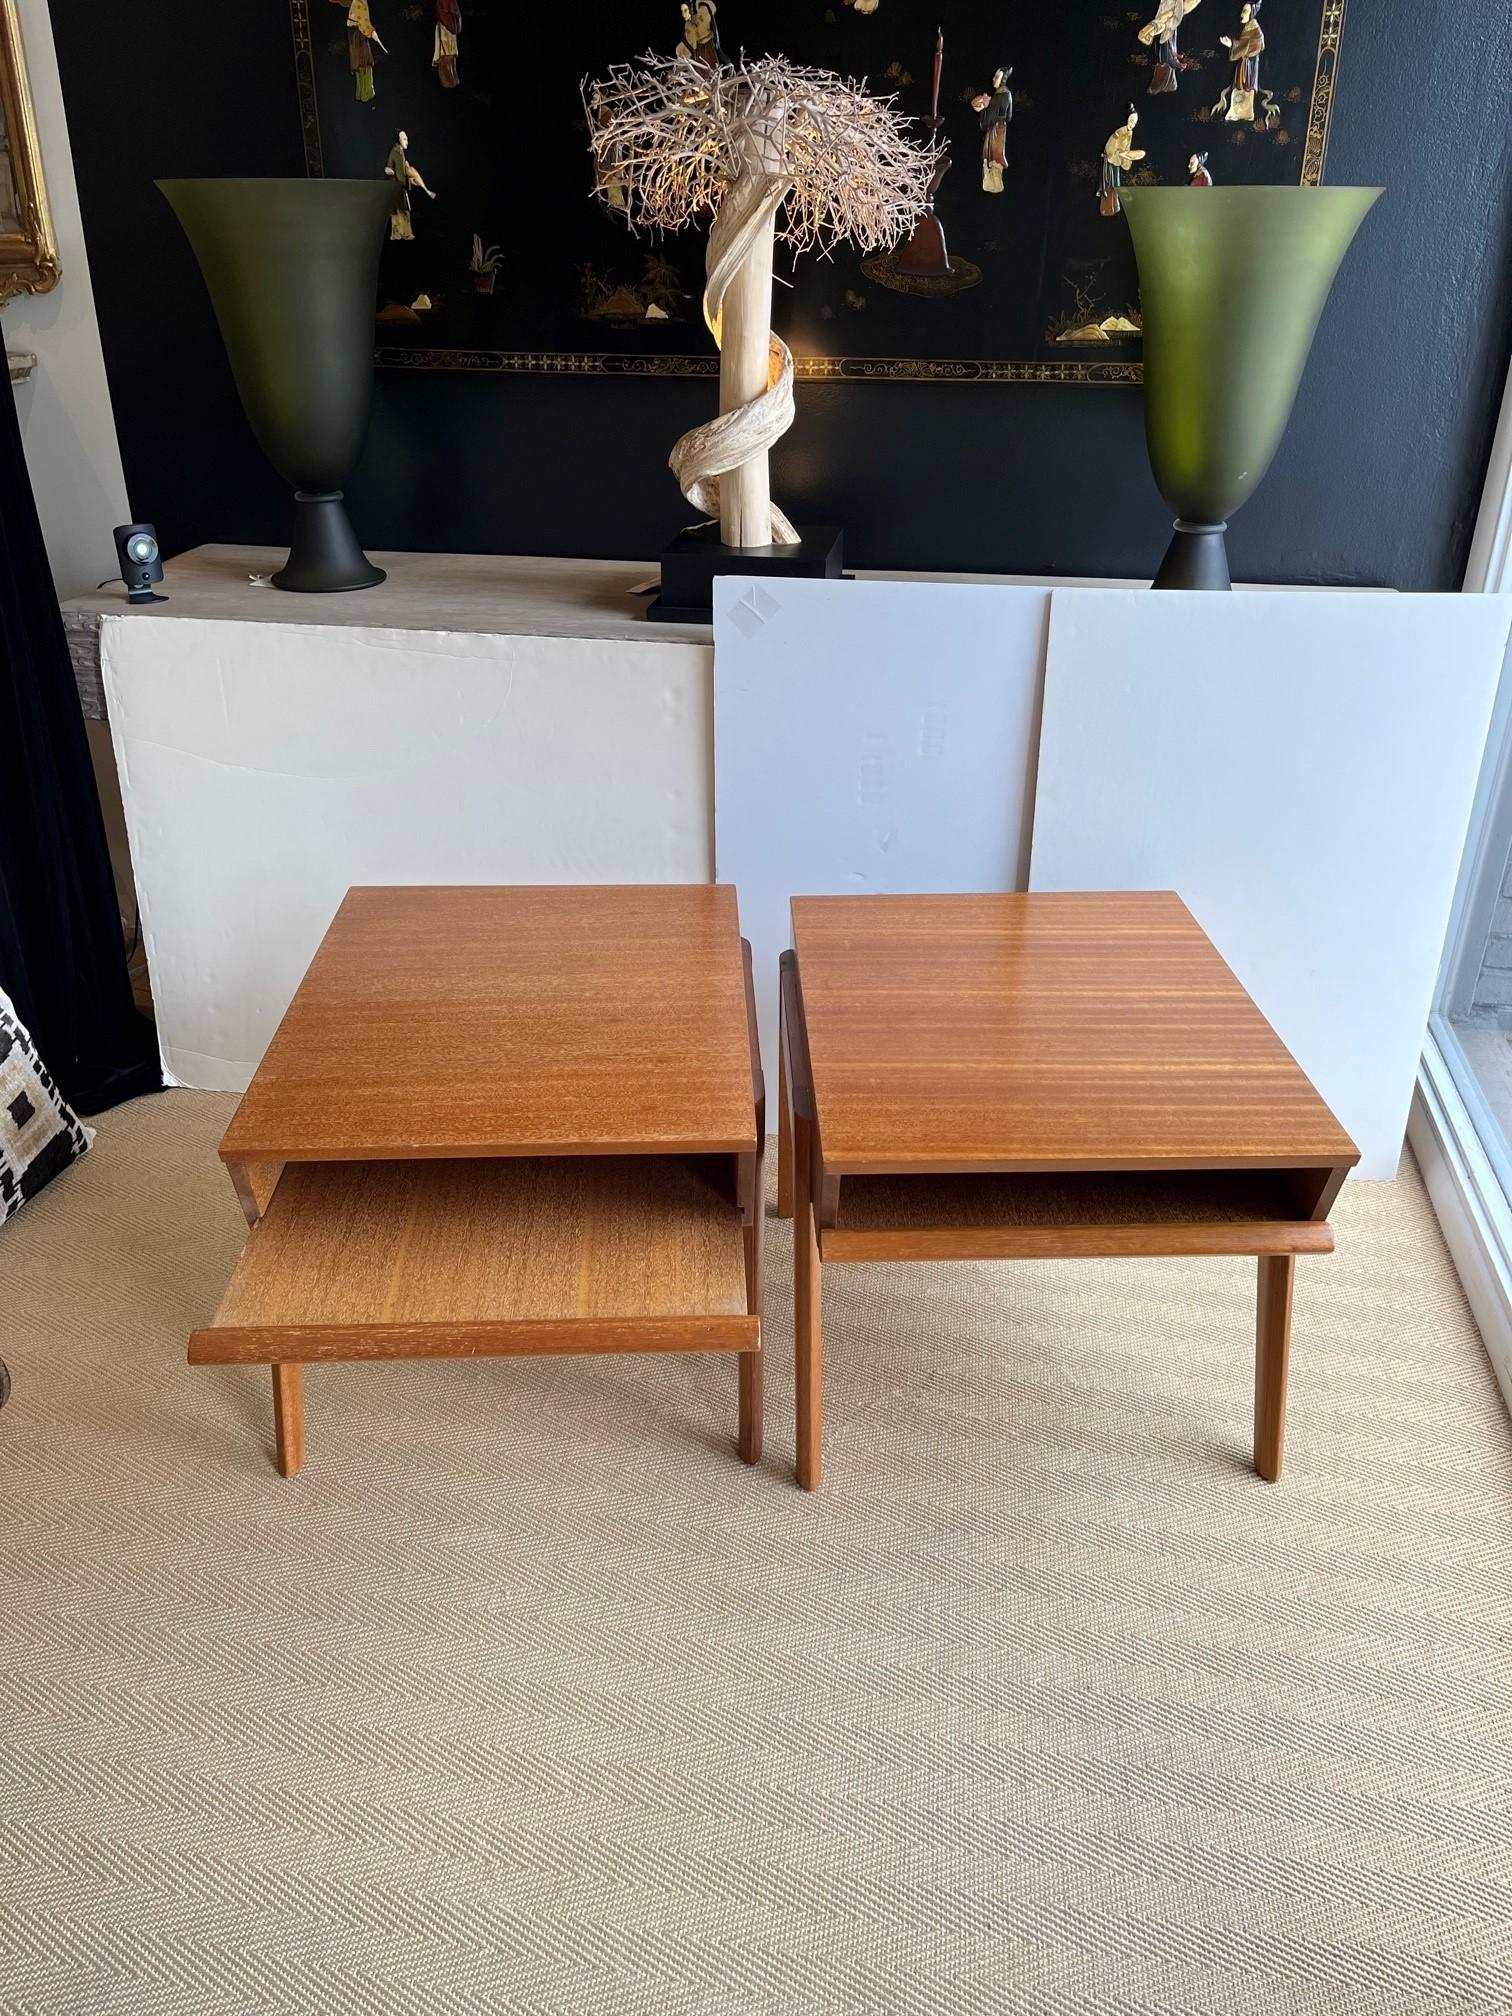 Pair of Mid-Century Modern Tray Side Table Designed by John Keal  For Sale 1